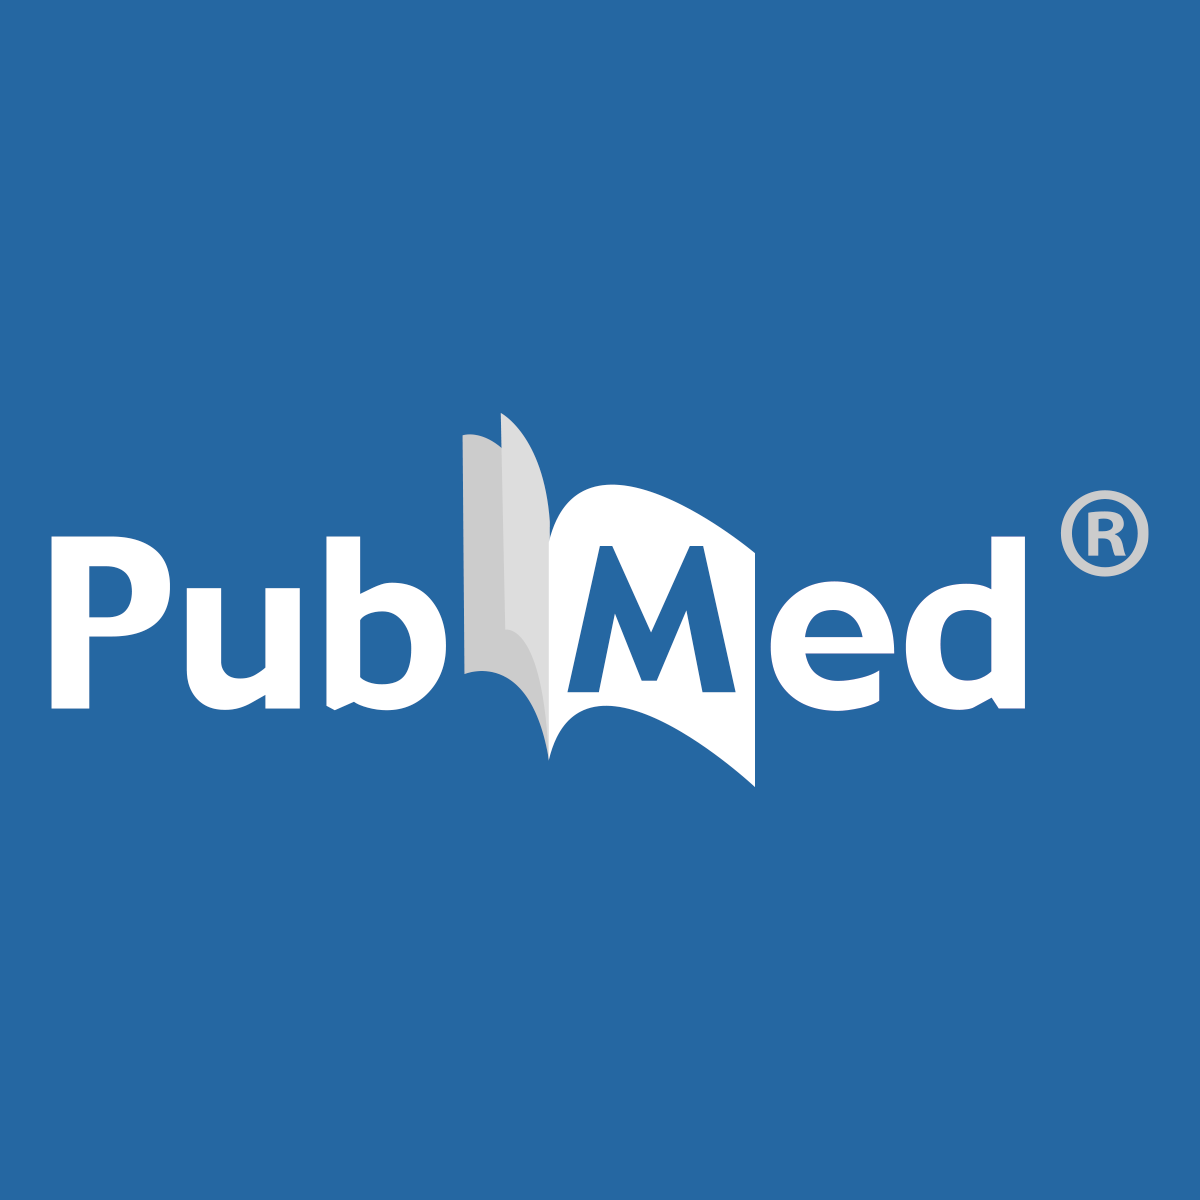 Clinical efficacy and safety of nivolumab in malignant non-pleural mesothelioma: A multicenter, open-label, single-arm, Japanese phase II trial (VIOLA) protocol - PubMed